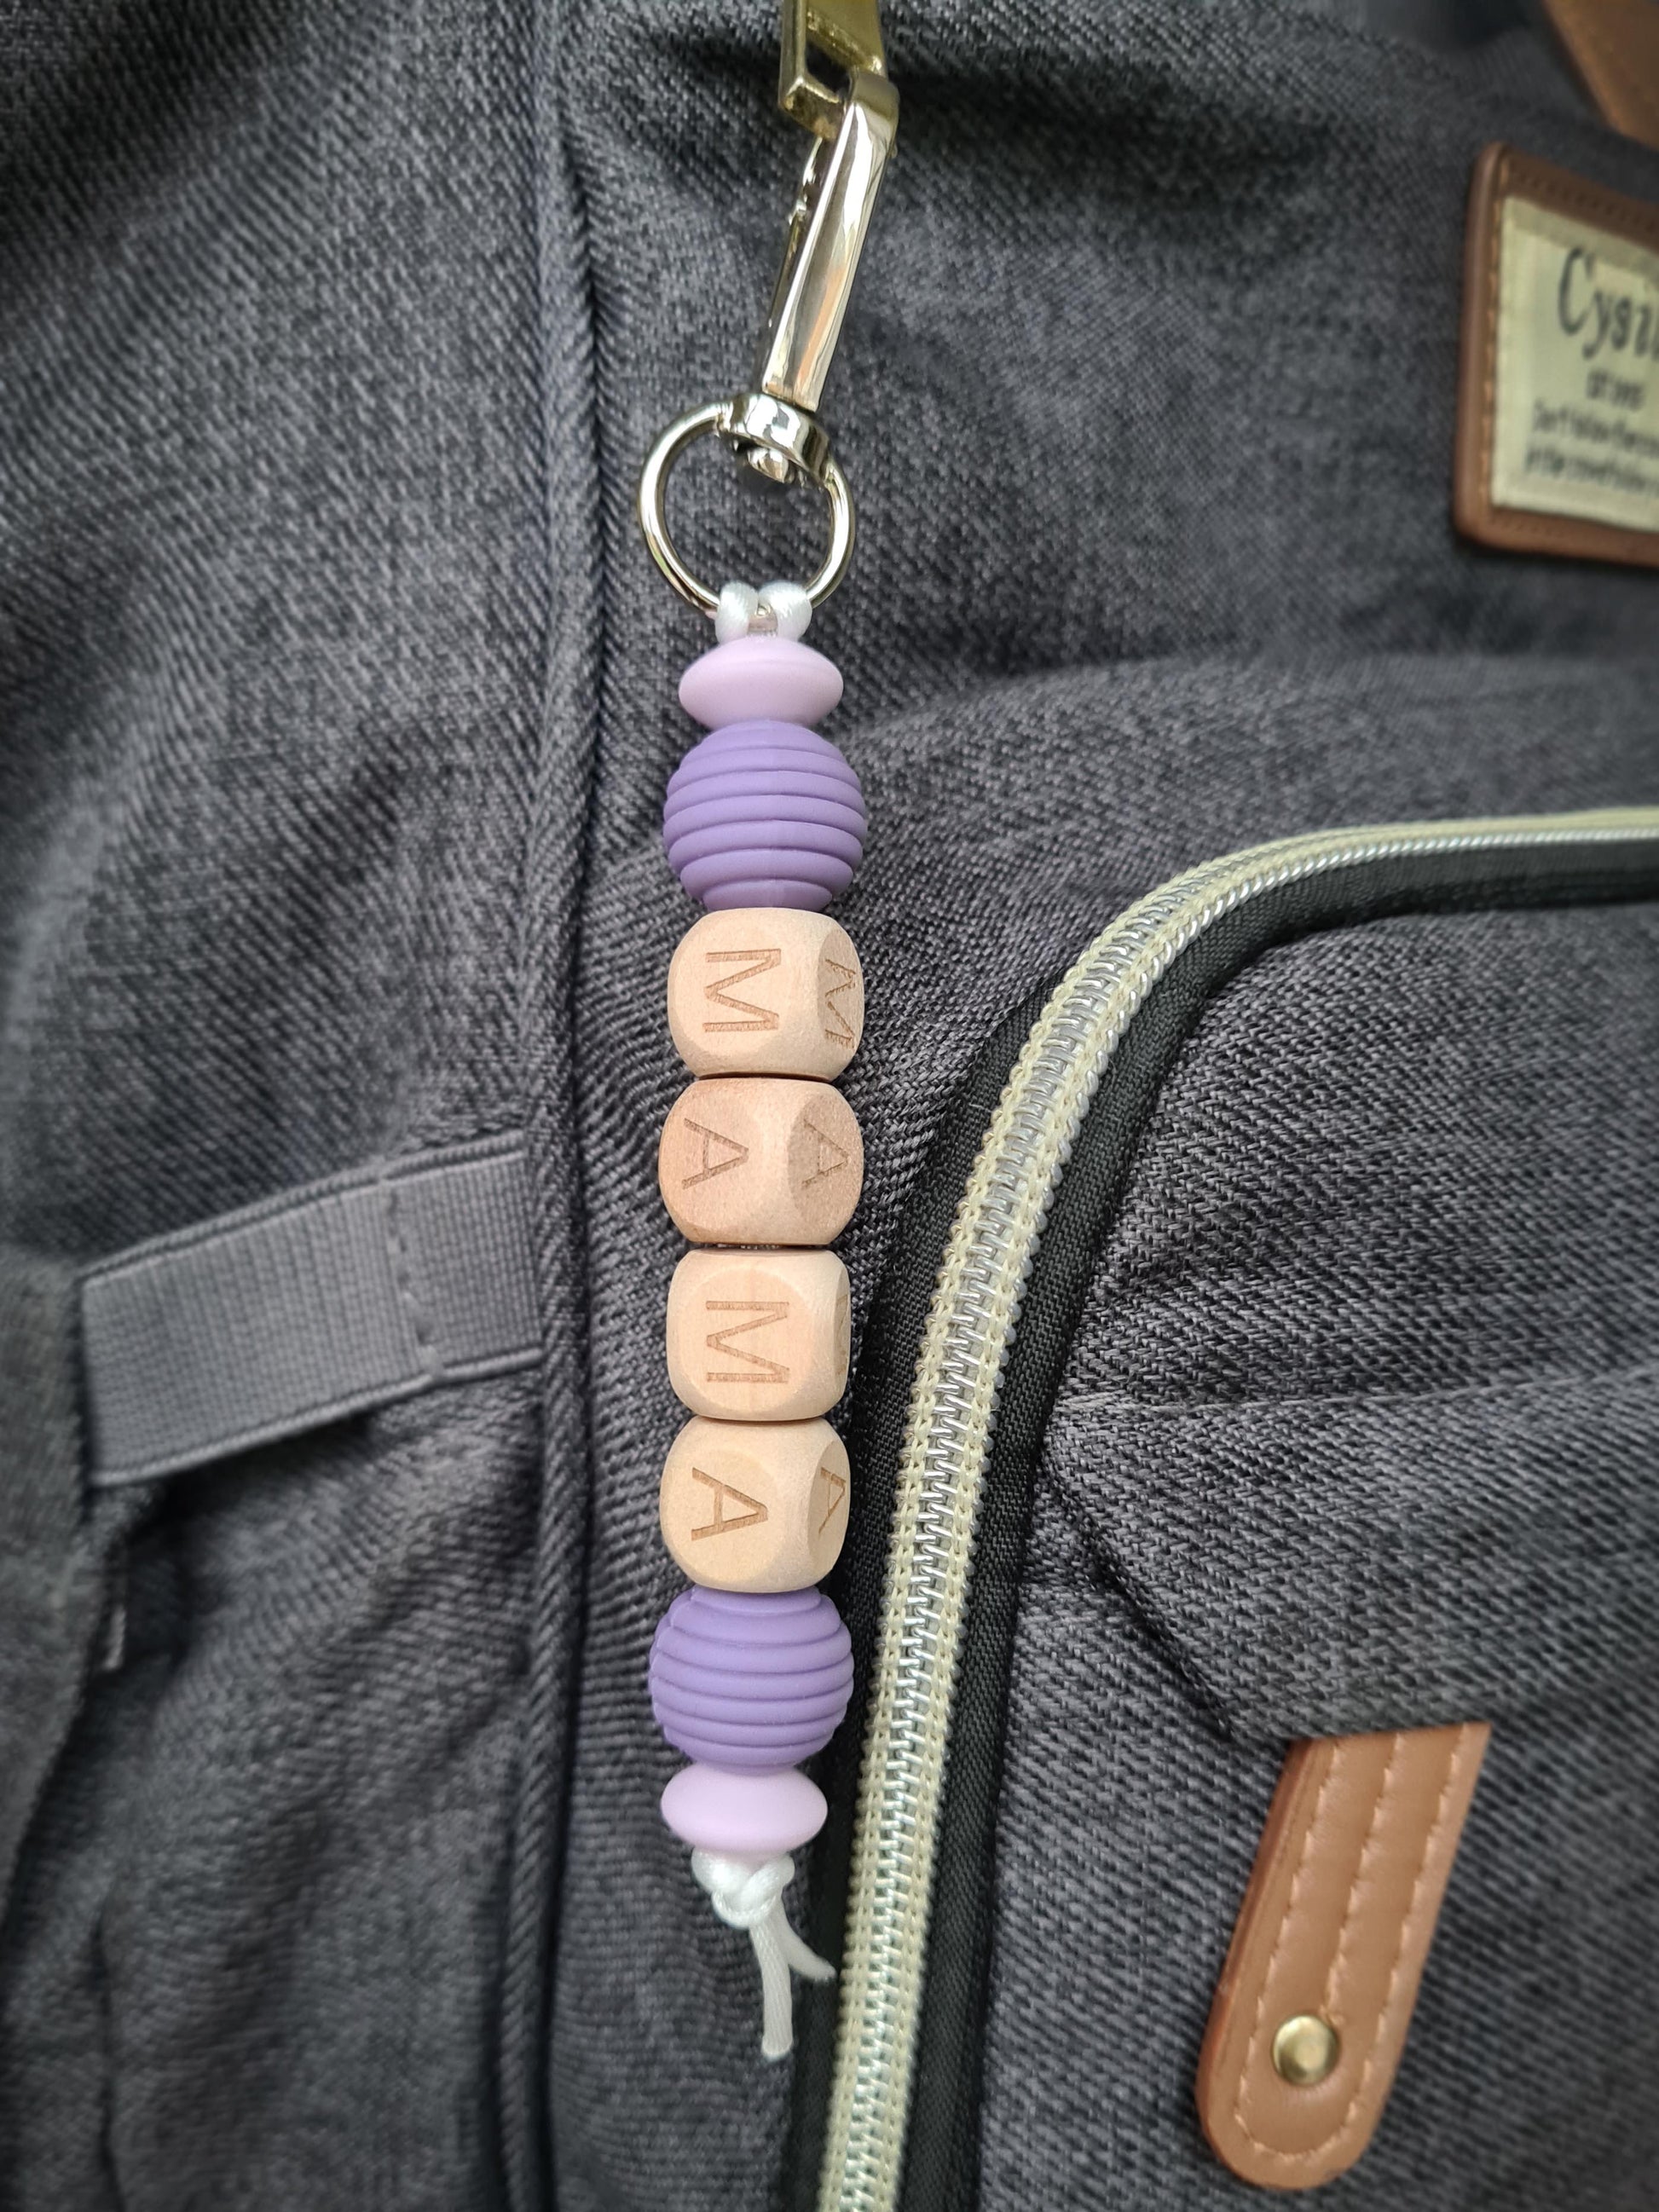 Hey Mama! Treat yo self to our unique handmade keychain / zip puller. Our keychains can be attached to handbags, baby changing bags, backpacks or as a keyring!